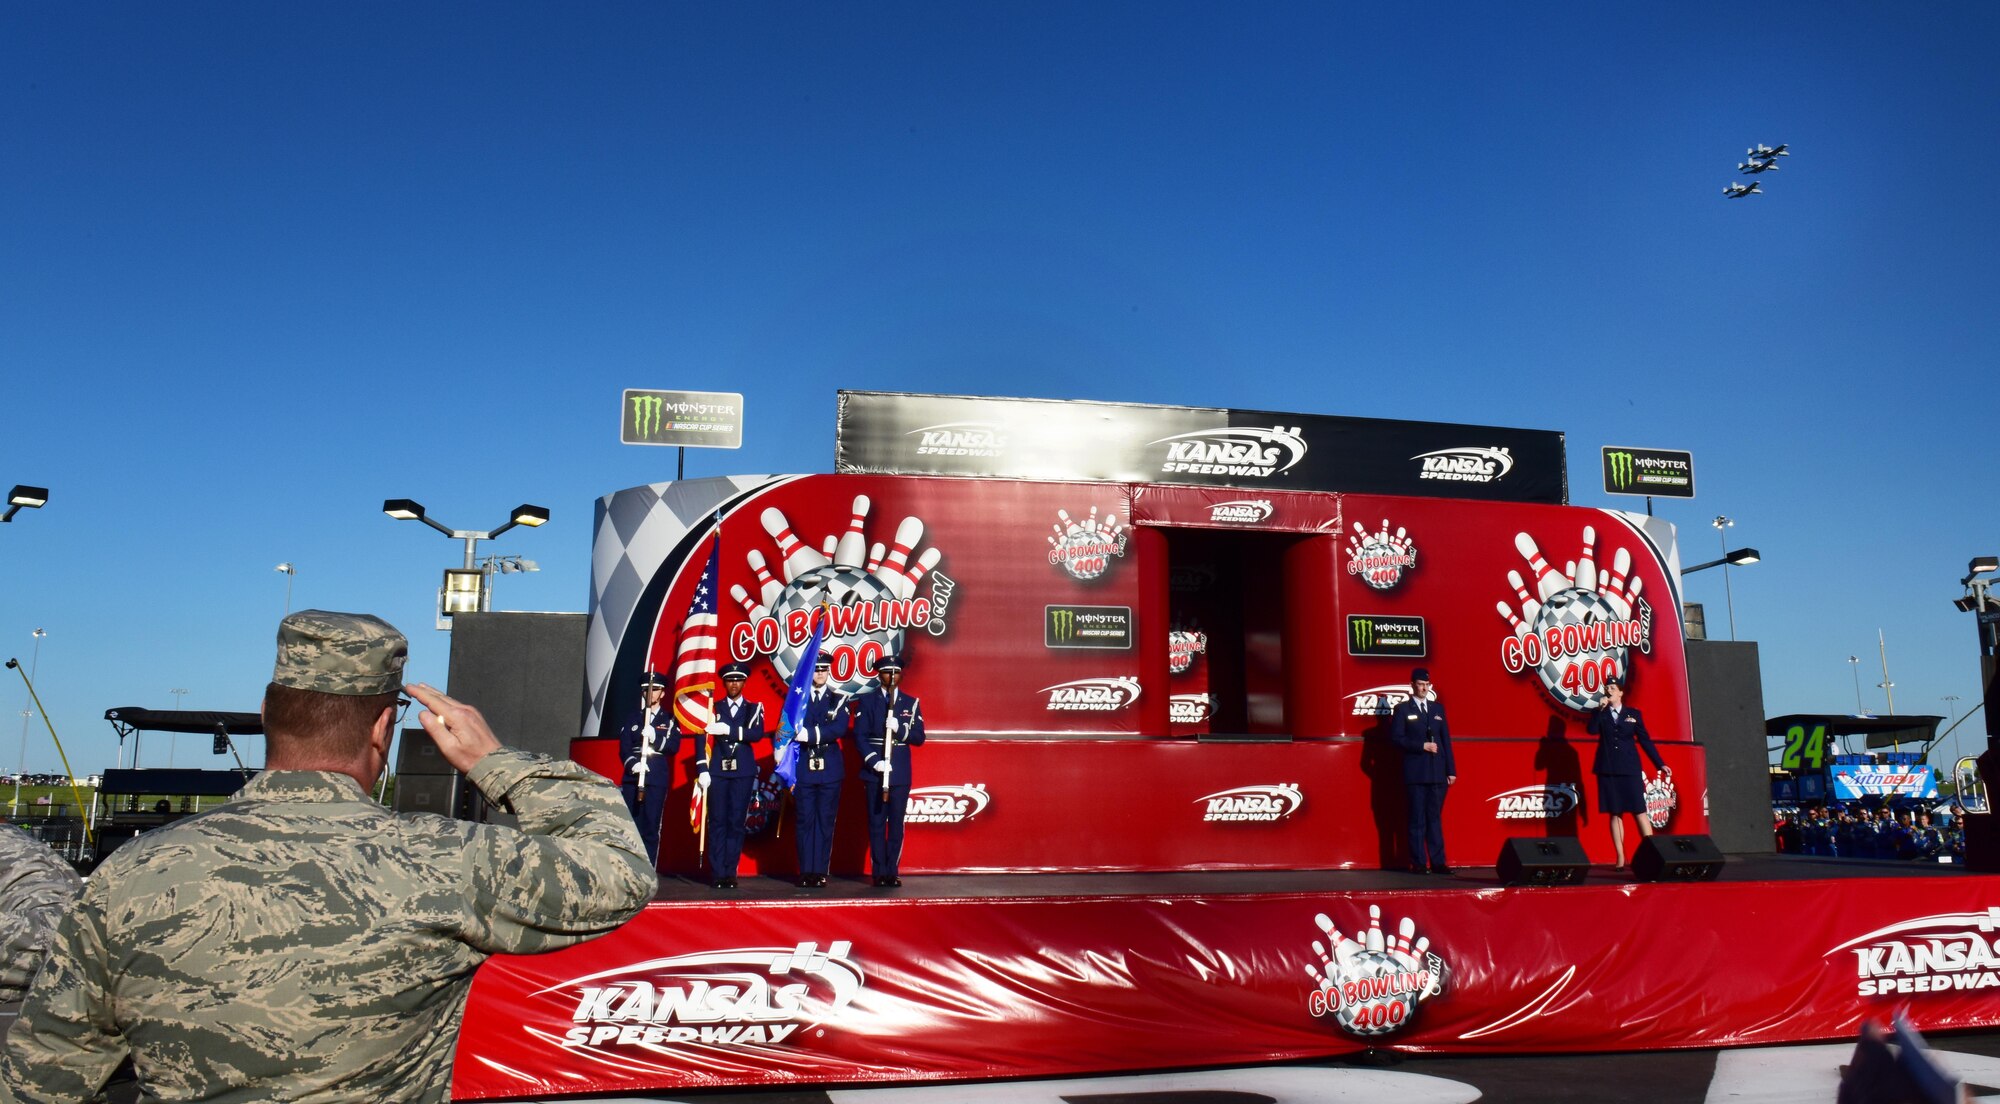 Airmen from Whiteman Air Force Base, Mo., participate in the pregame ceremonies prior to a NASCAR event at the Kansas City Speedway in Kansas City, Kan., May 13, 2017. Team Whiteman was invited to perform an A-10 Thunderbolt flyover, an invocation, the singing of the National Anthem and present the colors as part of a military outreach event. (U.S. Air Force photo by Airman Michaela R. Slanchik)